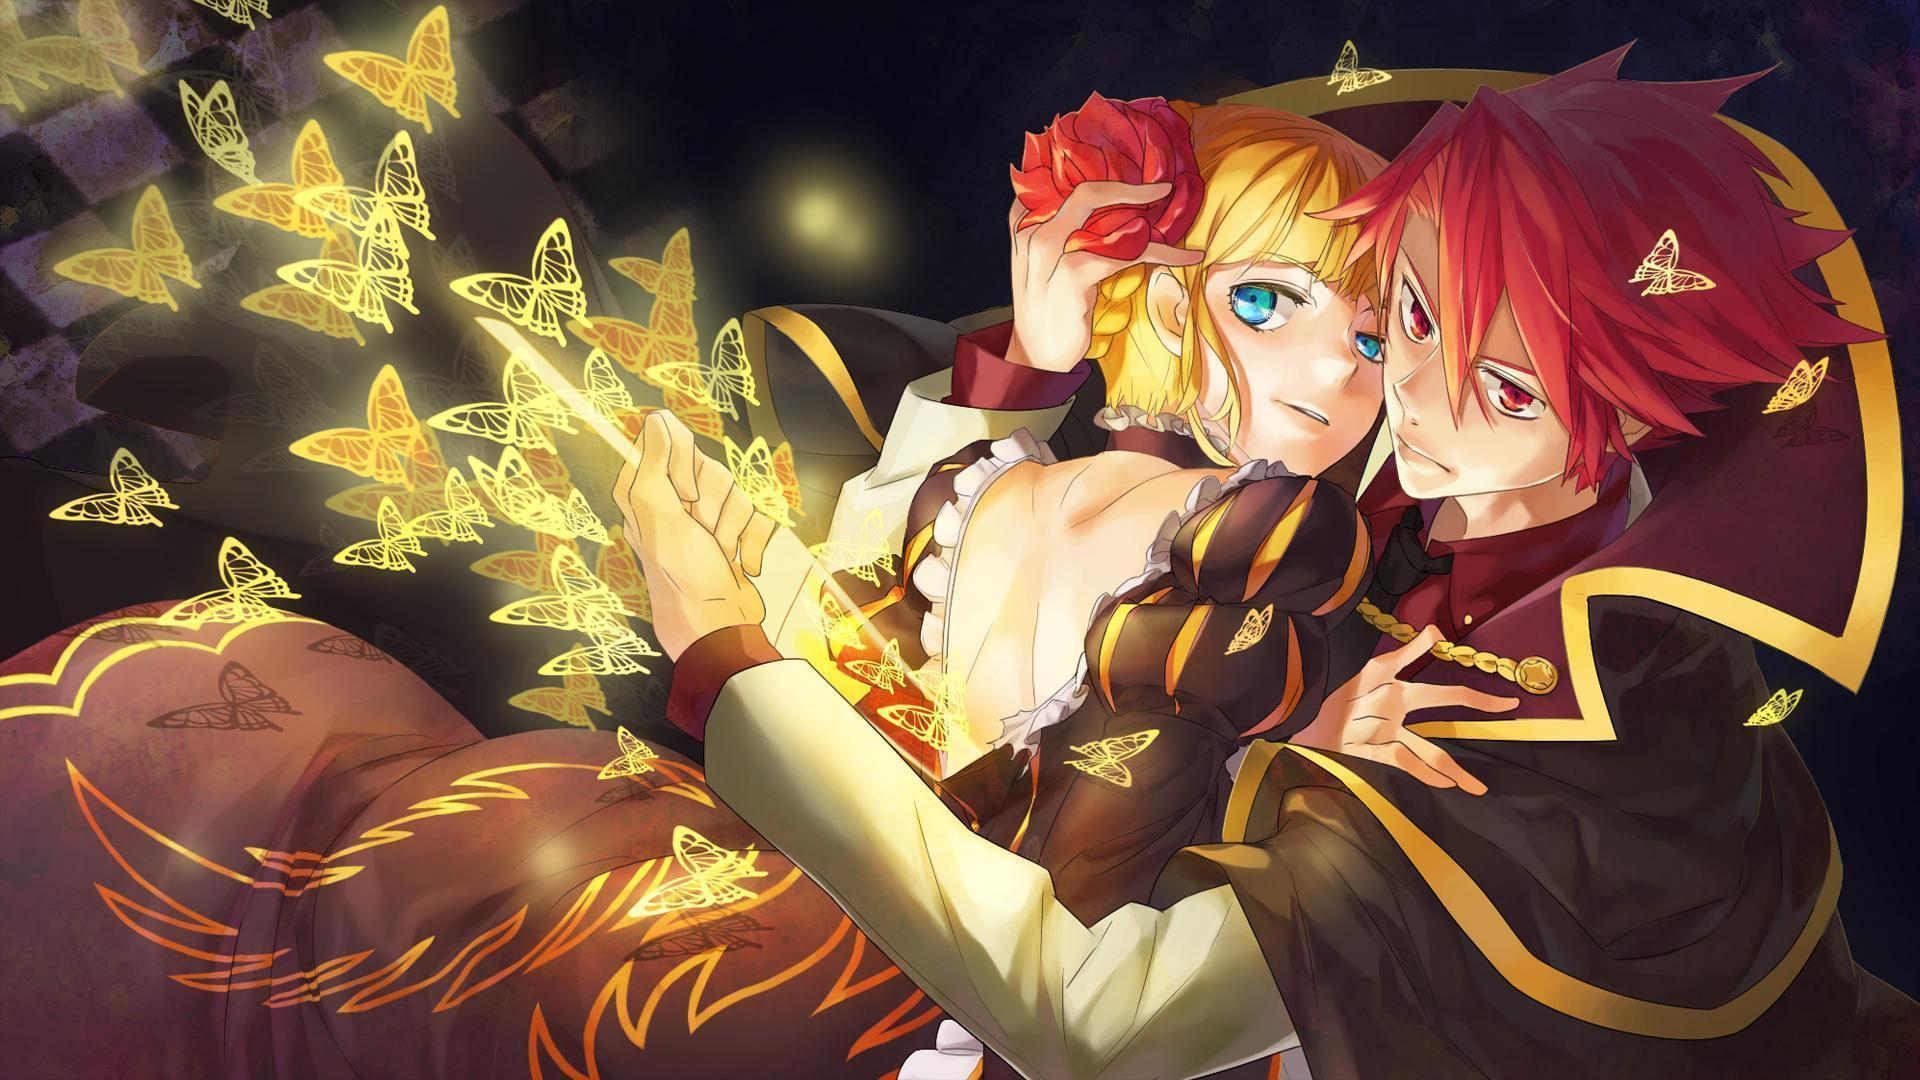 1920 x 1080 · jpeg - Anime Couple Wallpapers - Wallpaper Cave